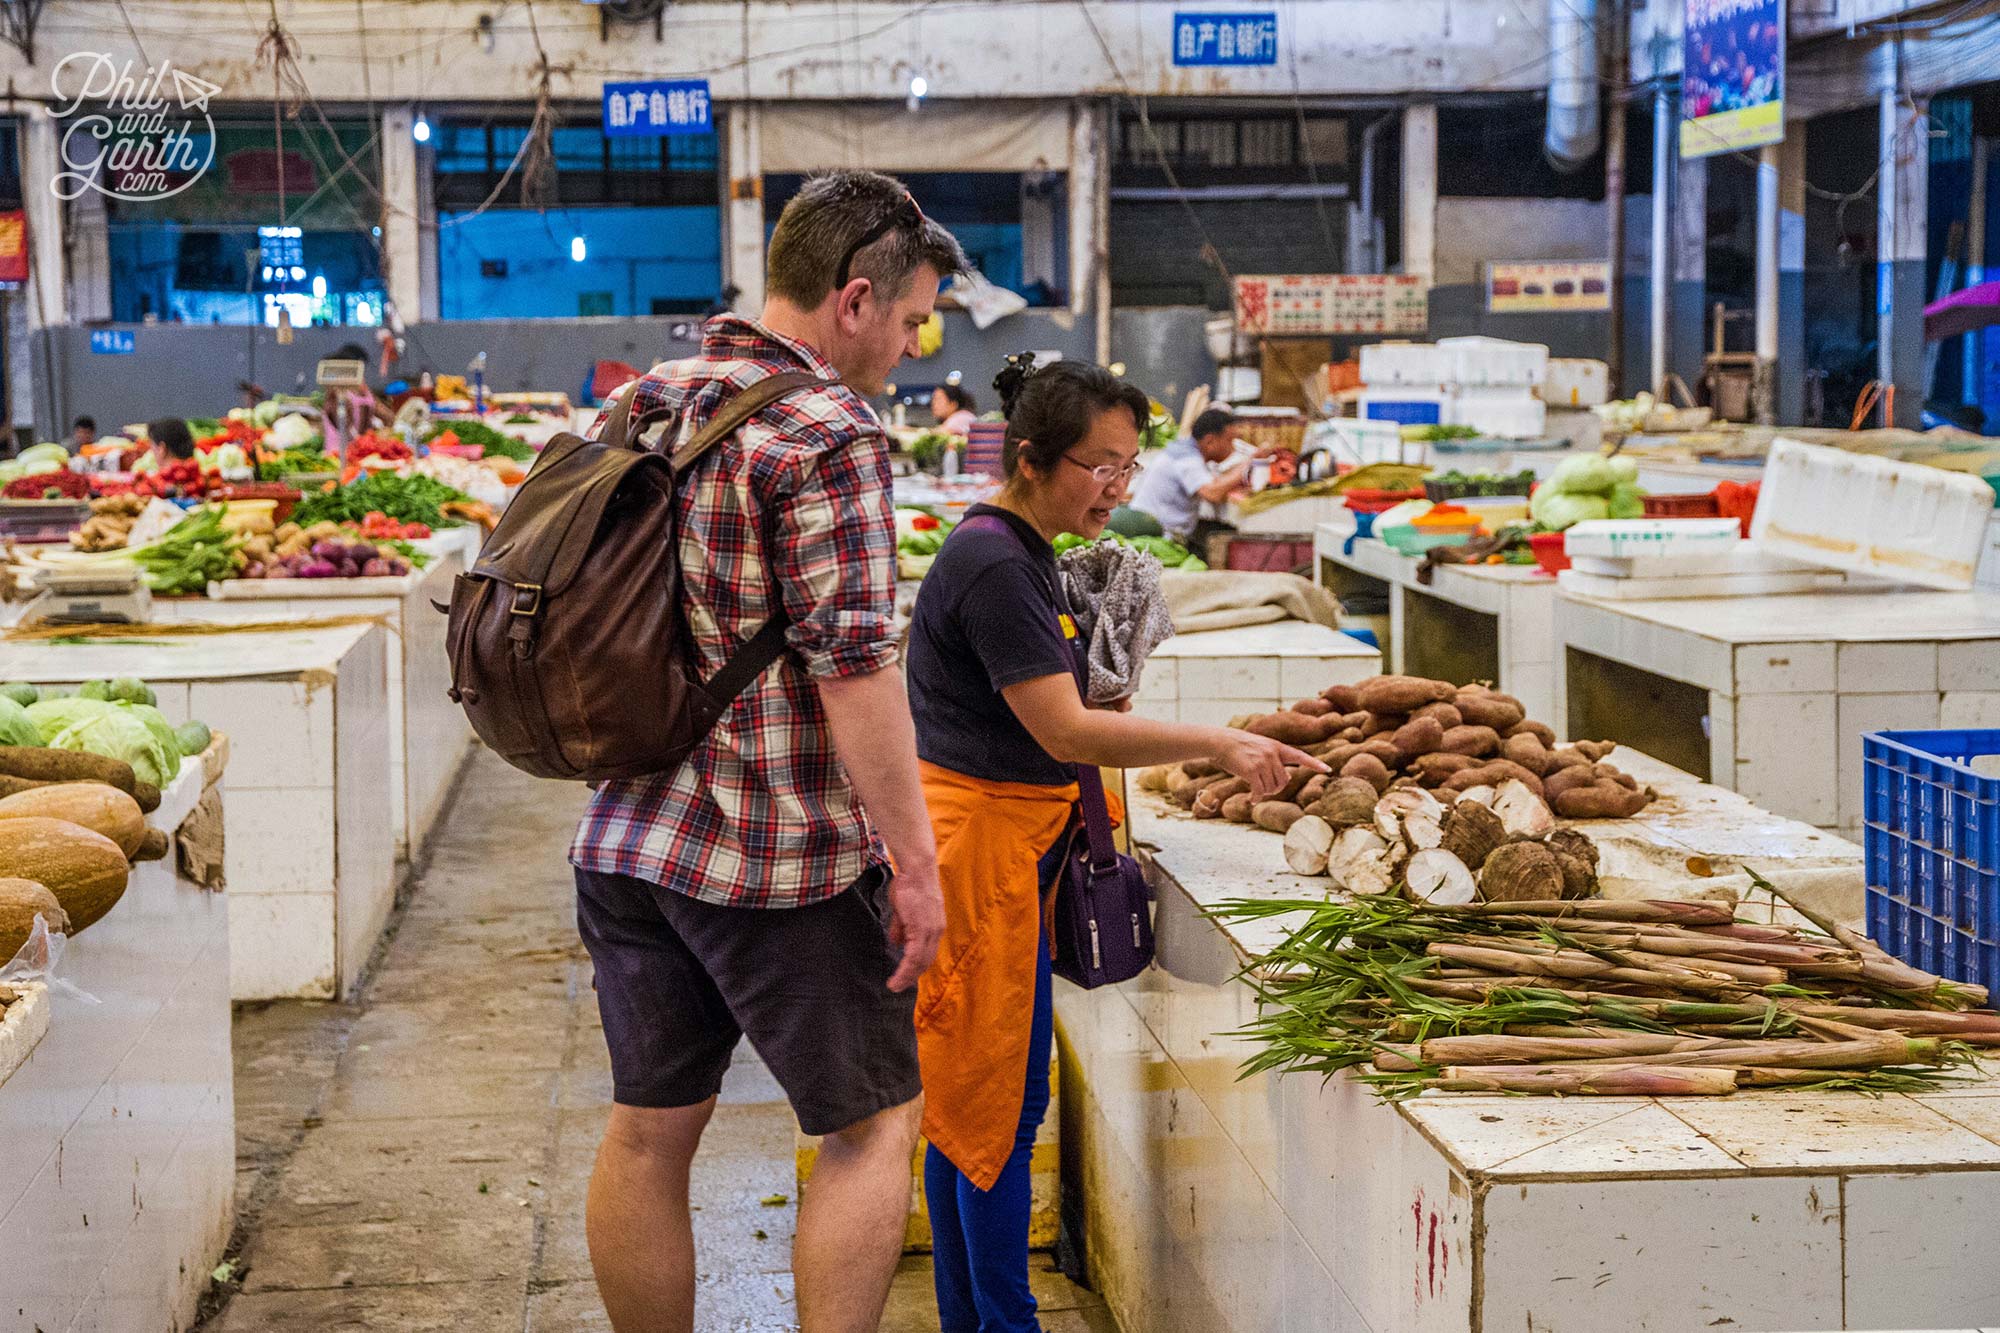 Inside the food market, our guide showing Phil bamboo shoots for sale